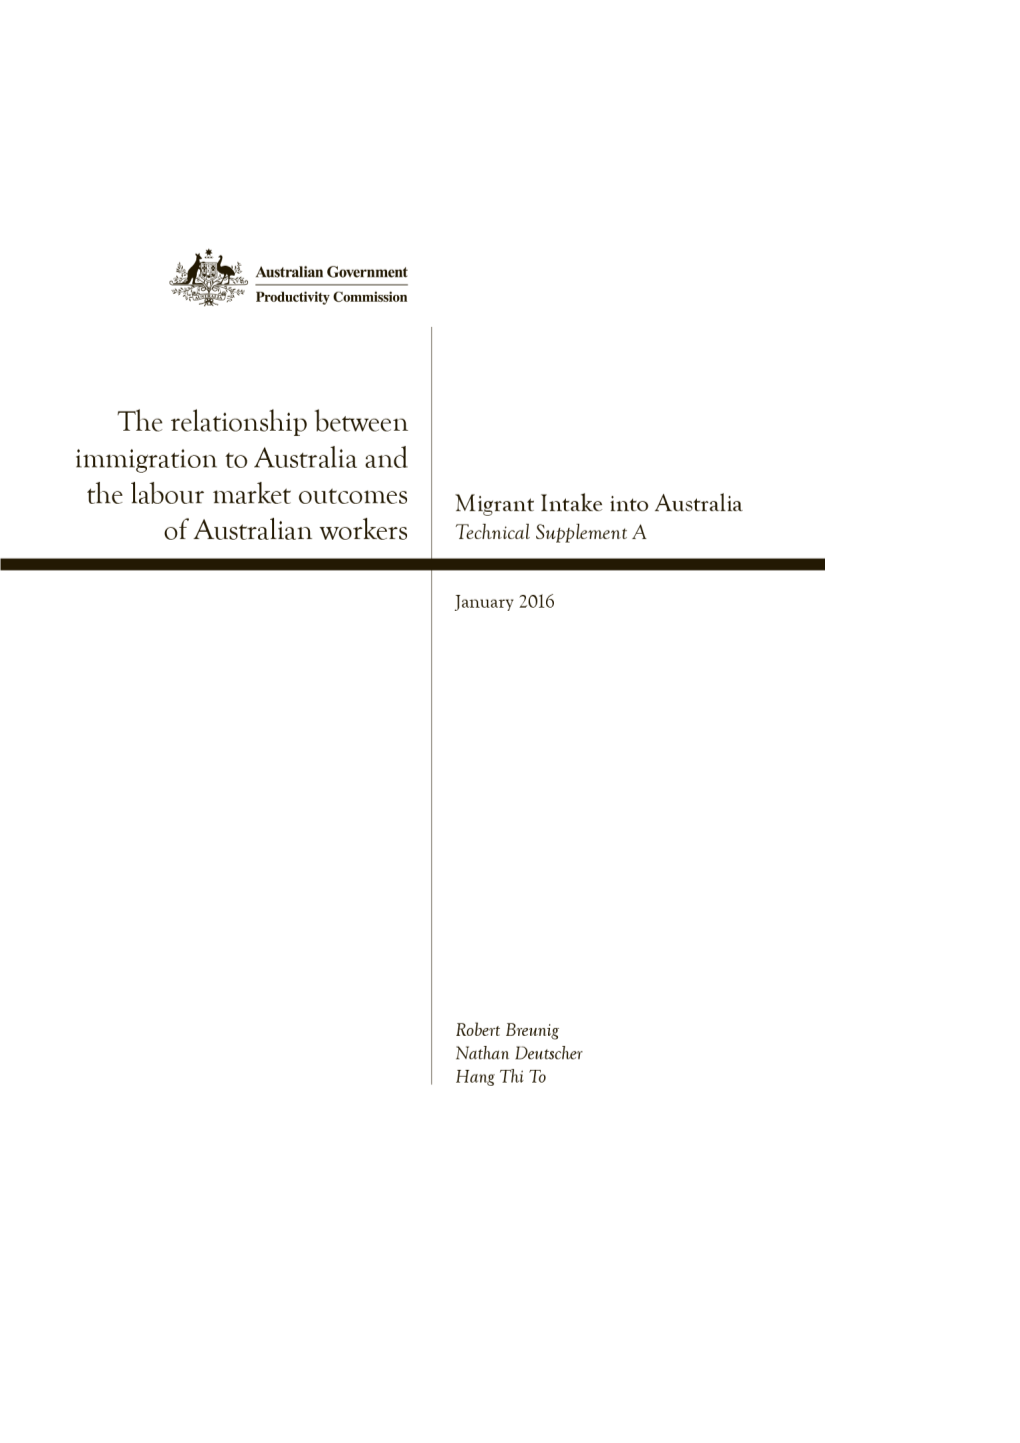 The Relationship Between Immigration to Australia and the Labour Market Outcomes of Australian